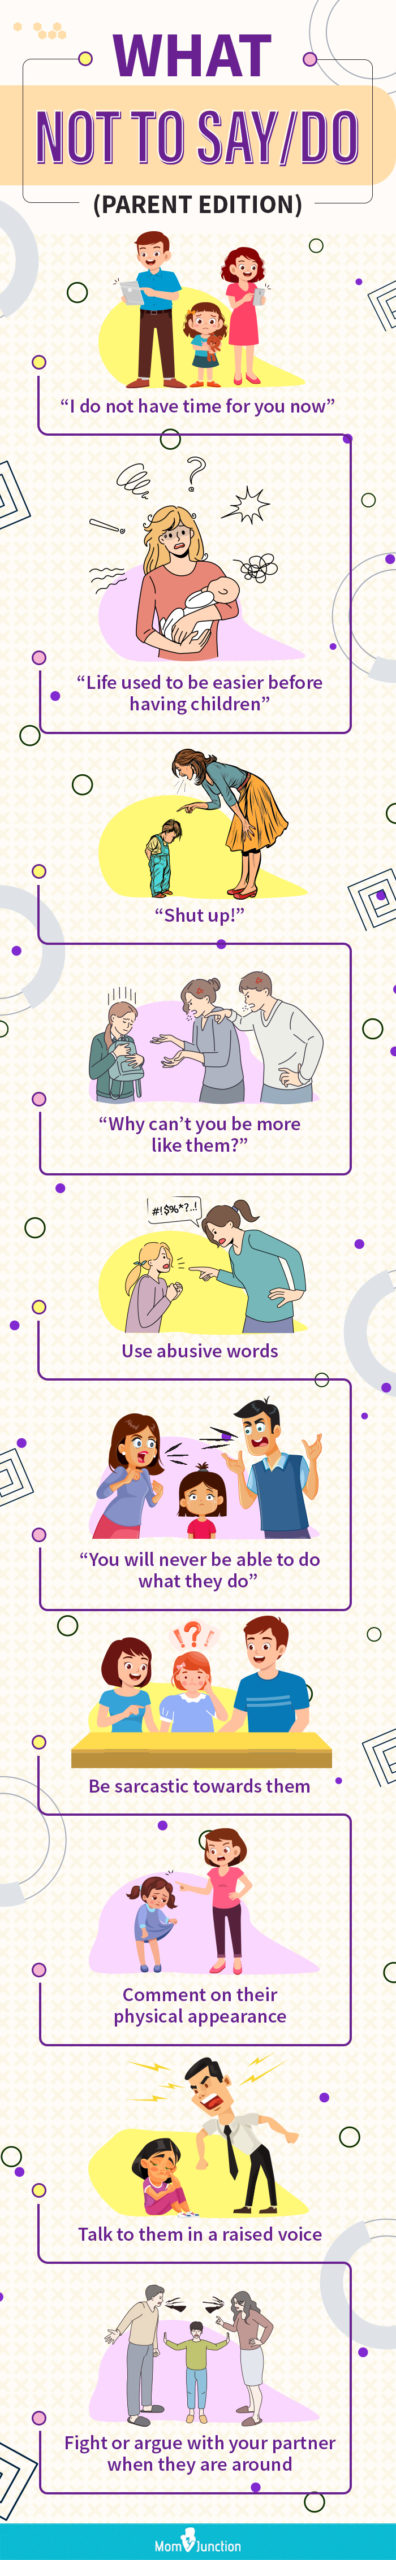 what not to say (infographic)